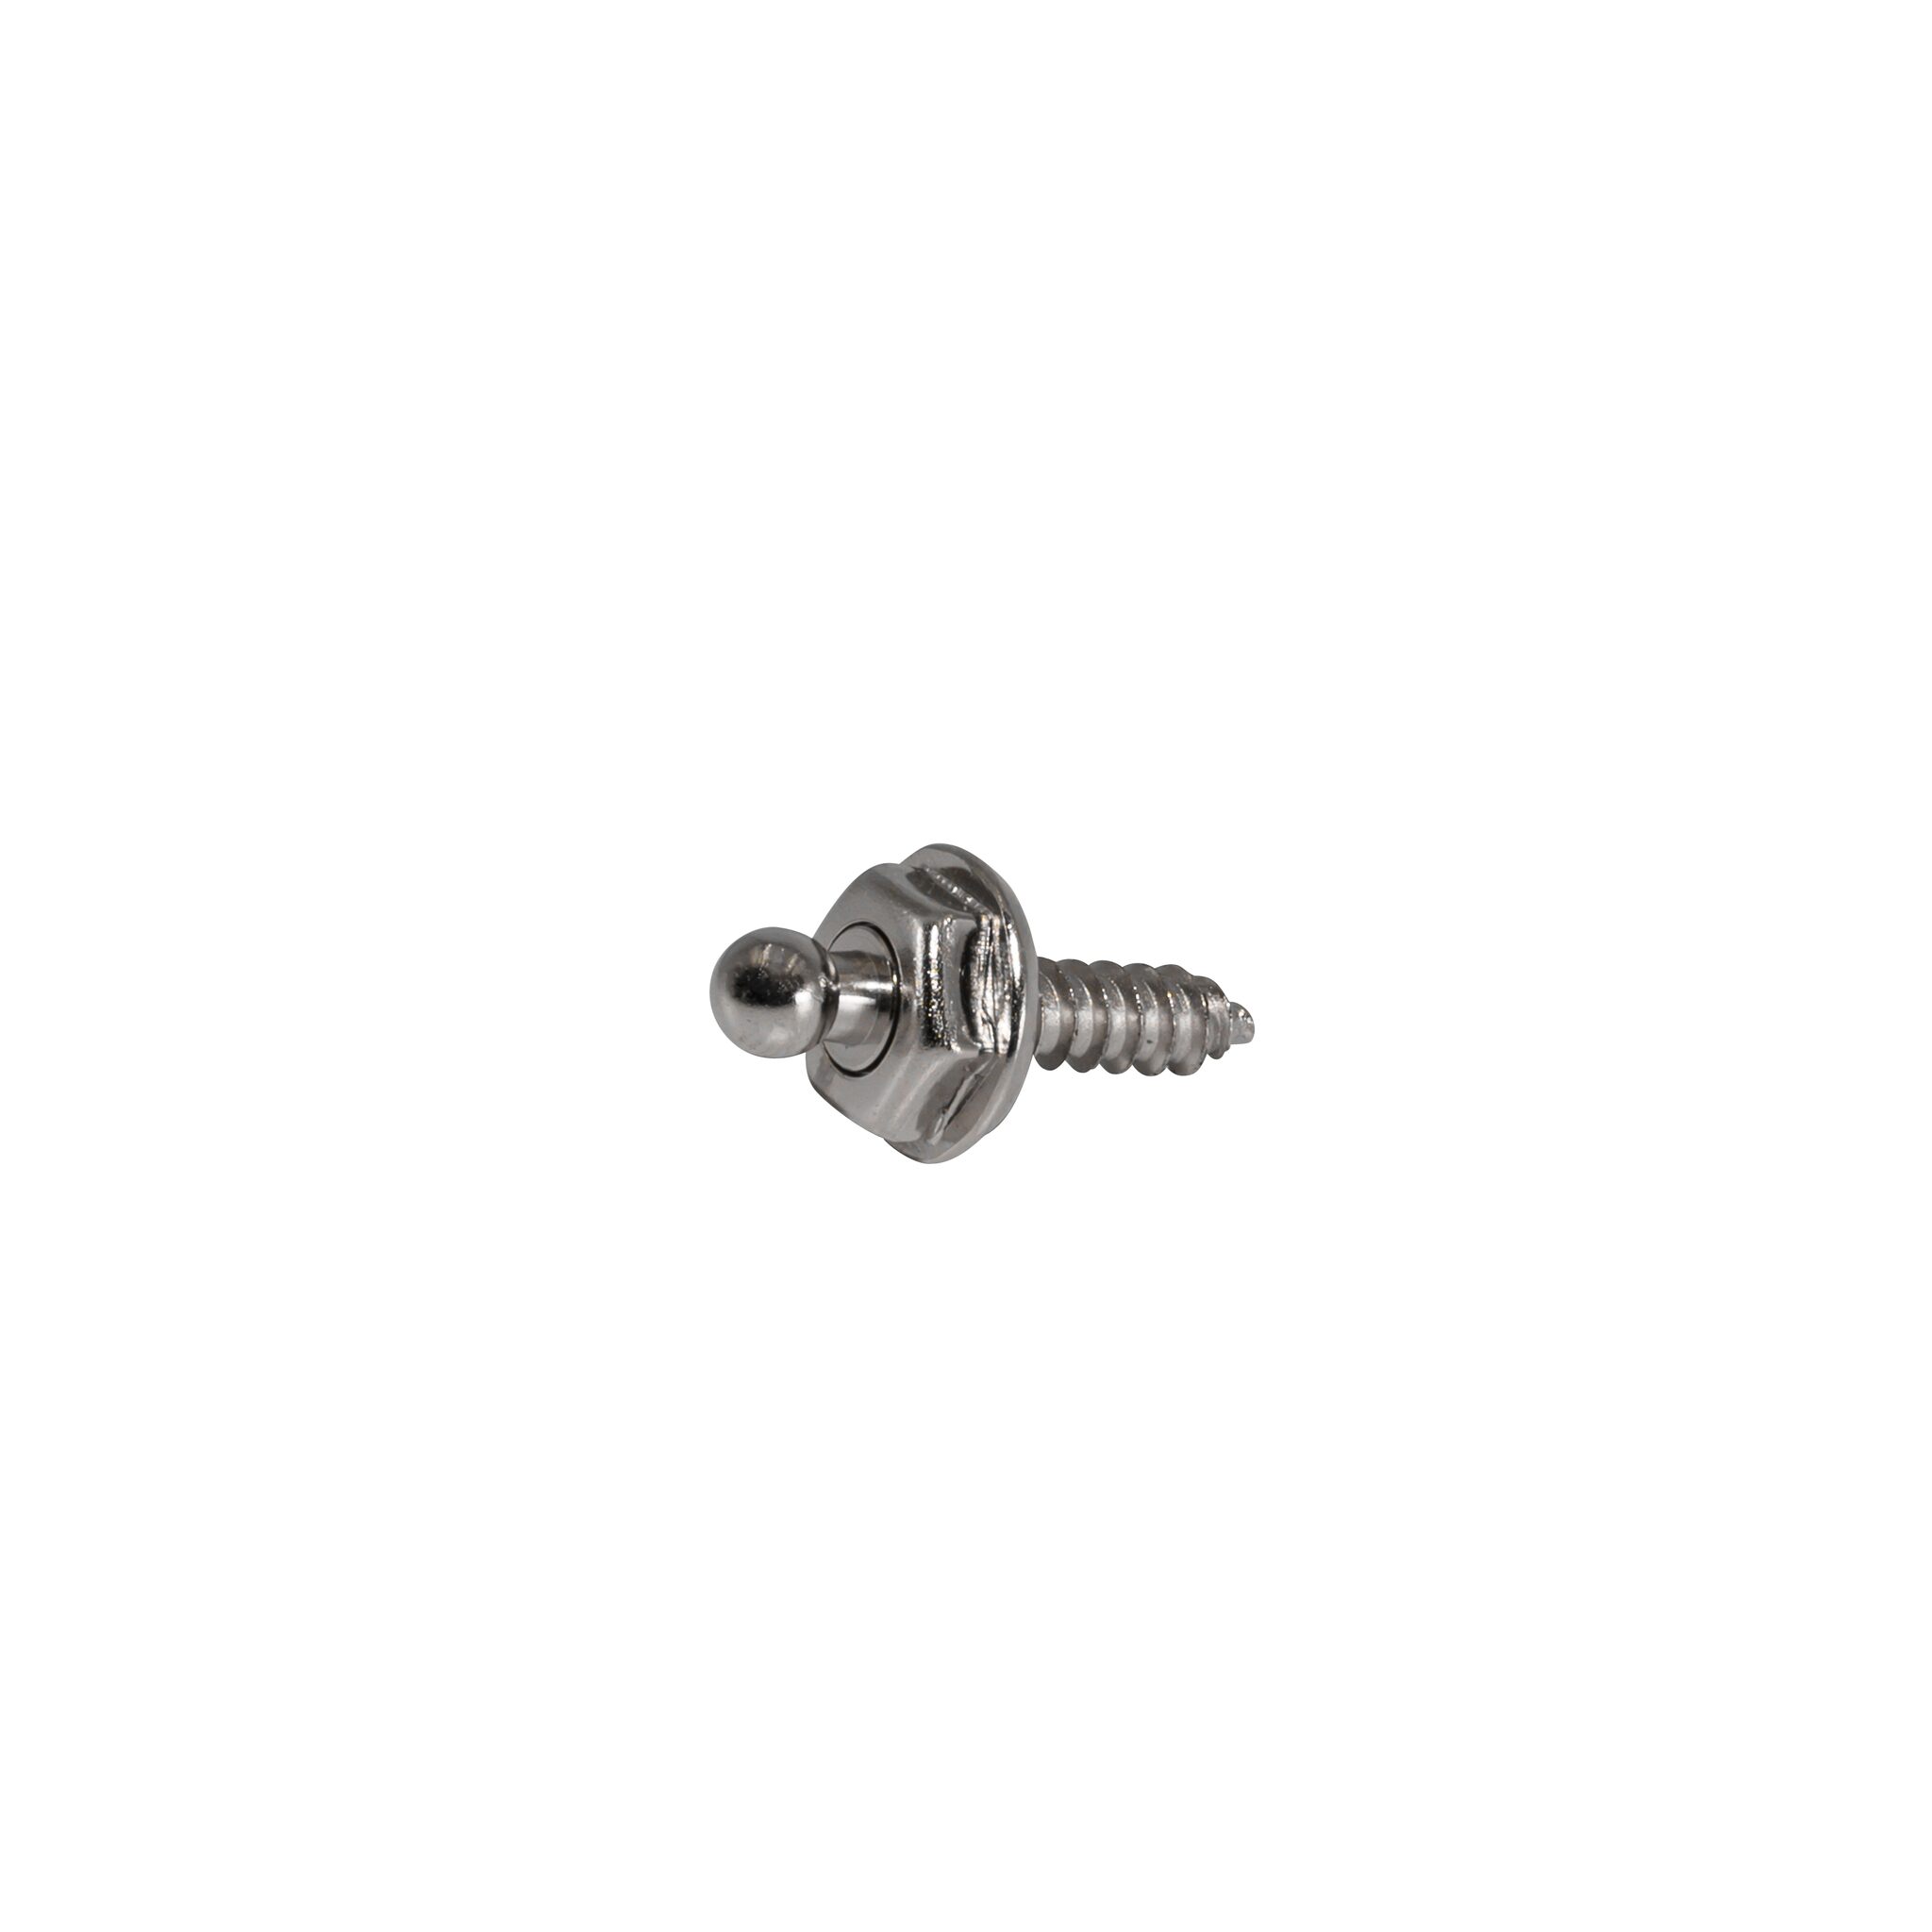 LOXX tarpaulin knobs lower part with self-tapping screw